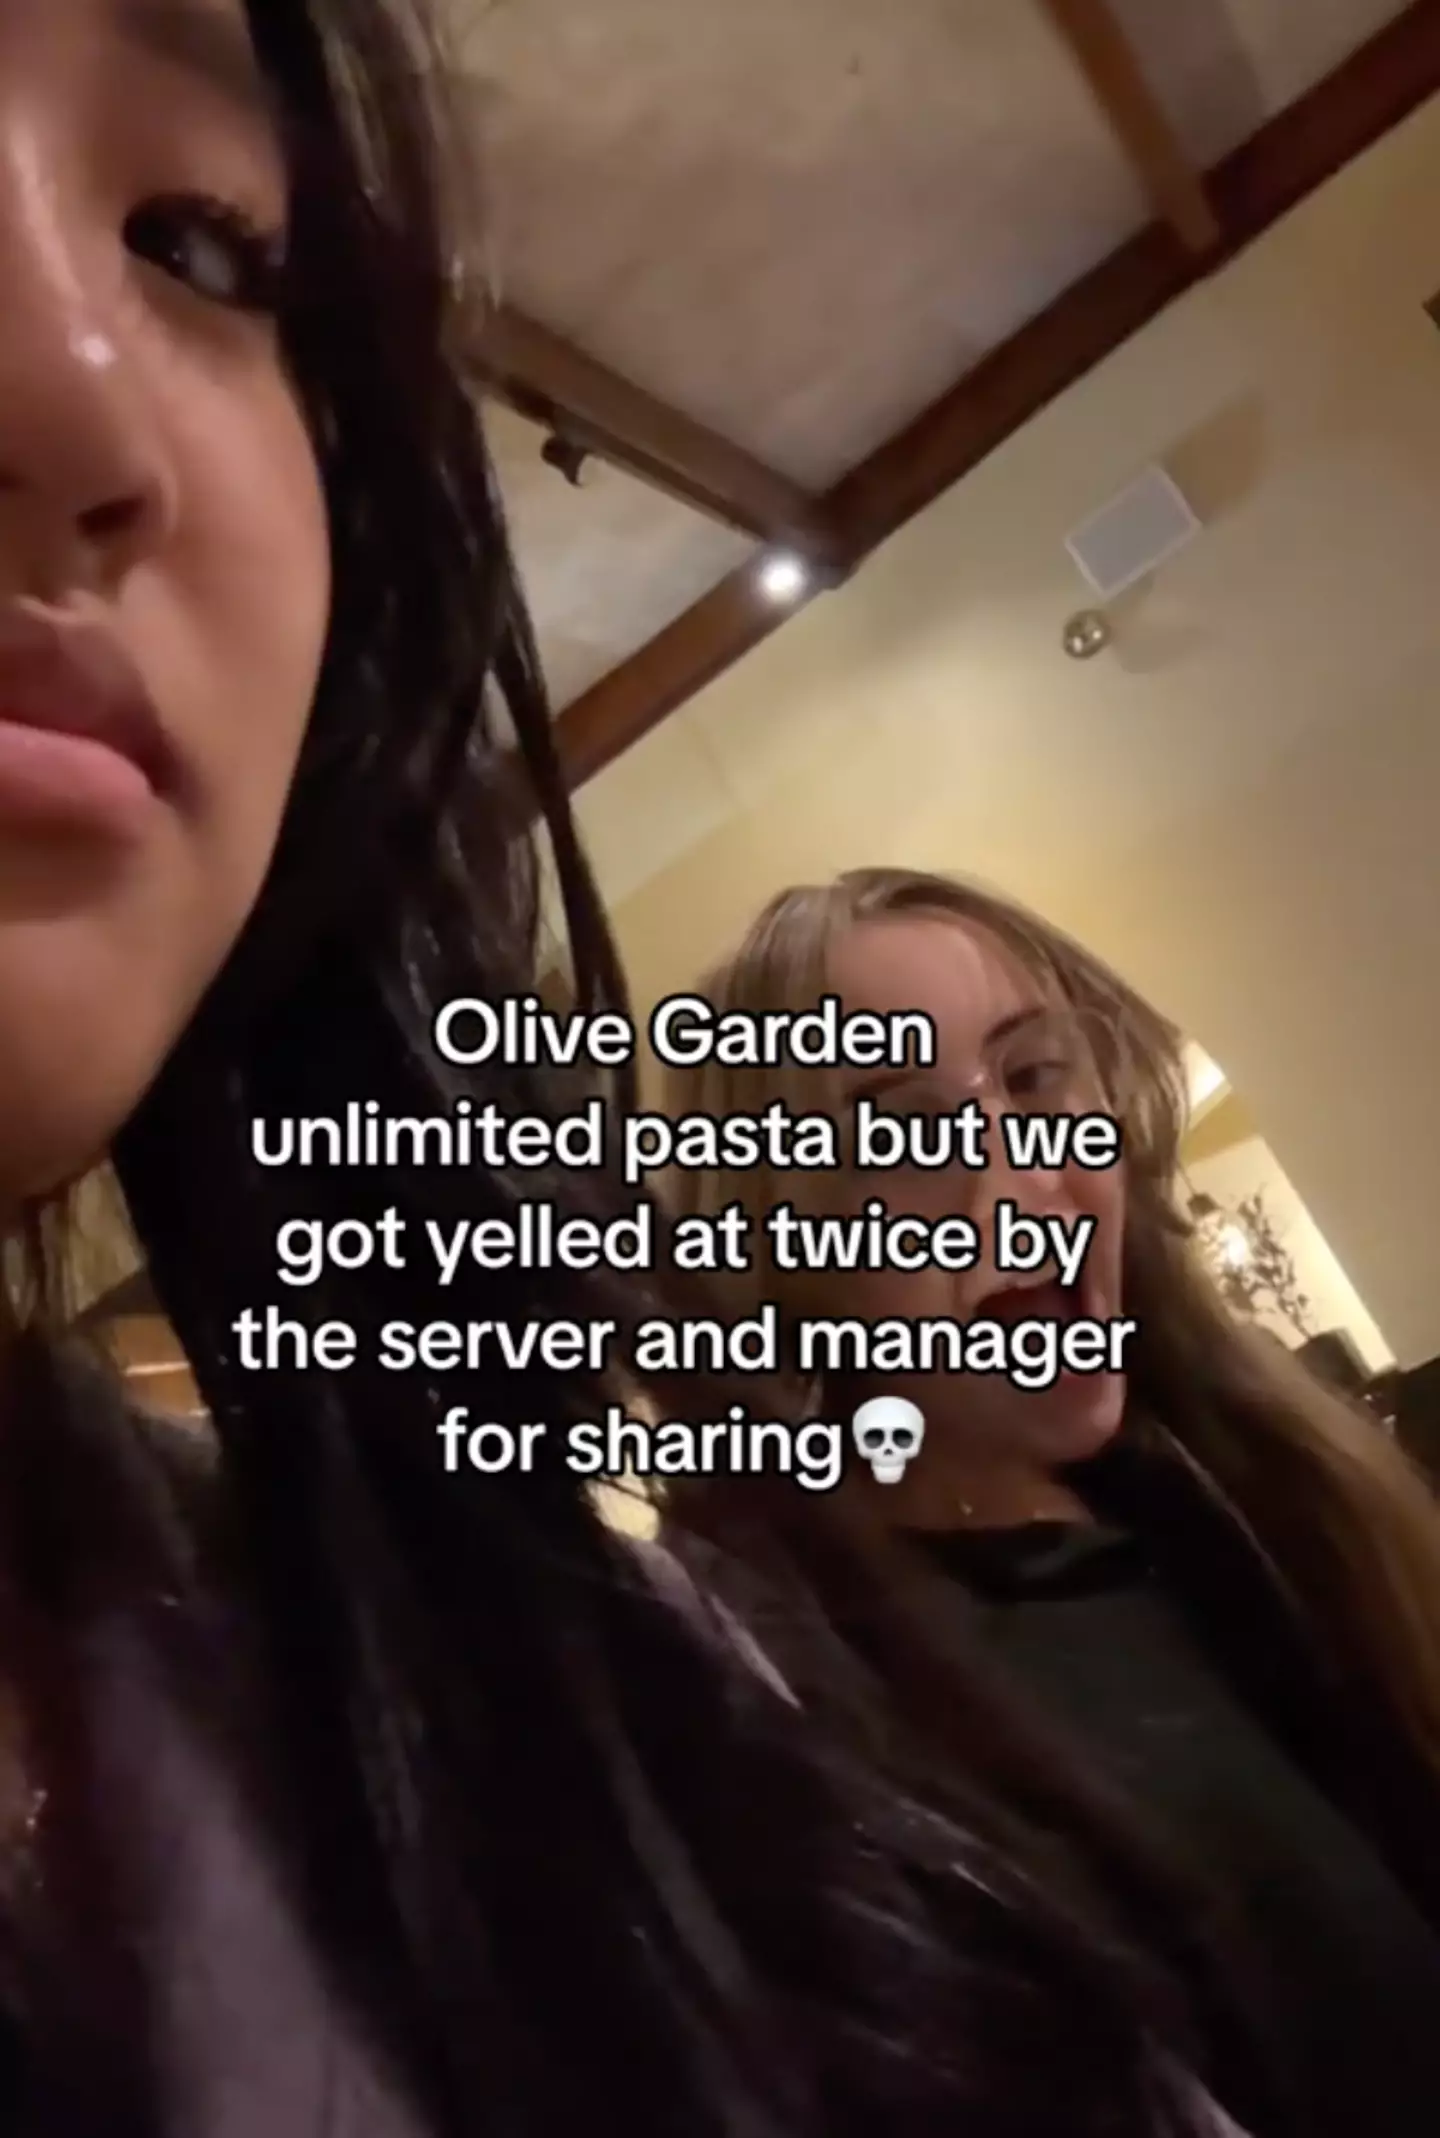 Ruth and her friends say they got 'yelled at twice' for sharing the meal.